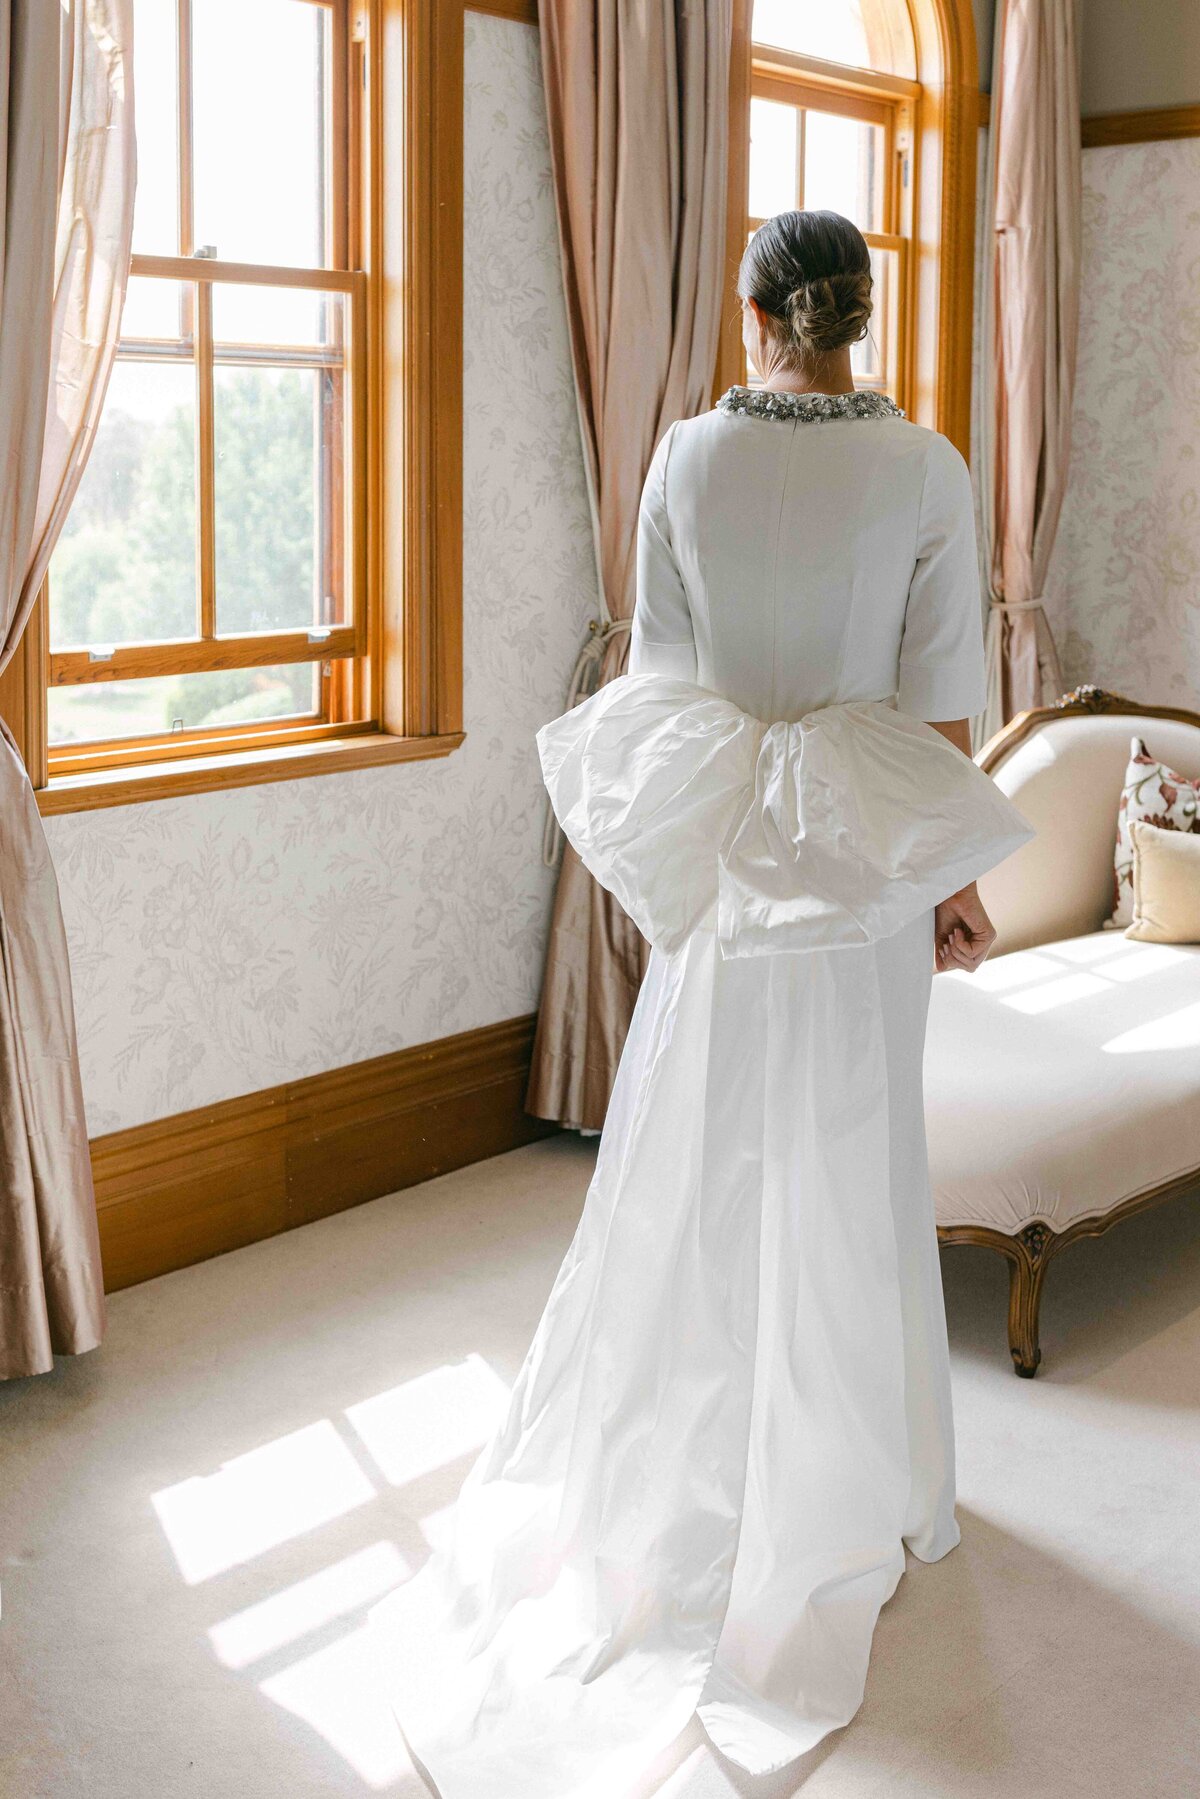 back view of the bride's wedding dress